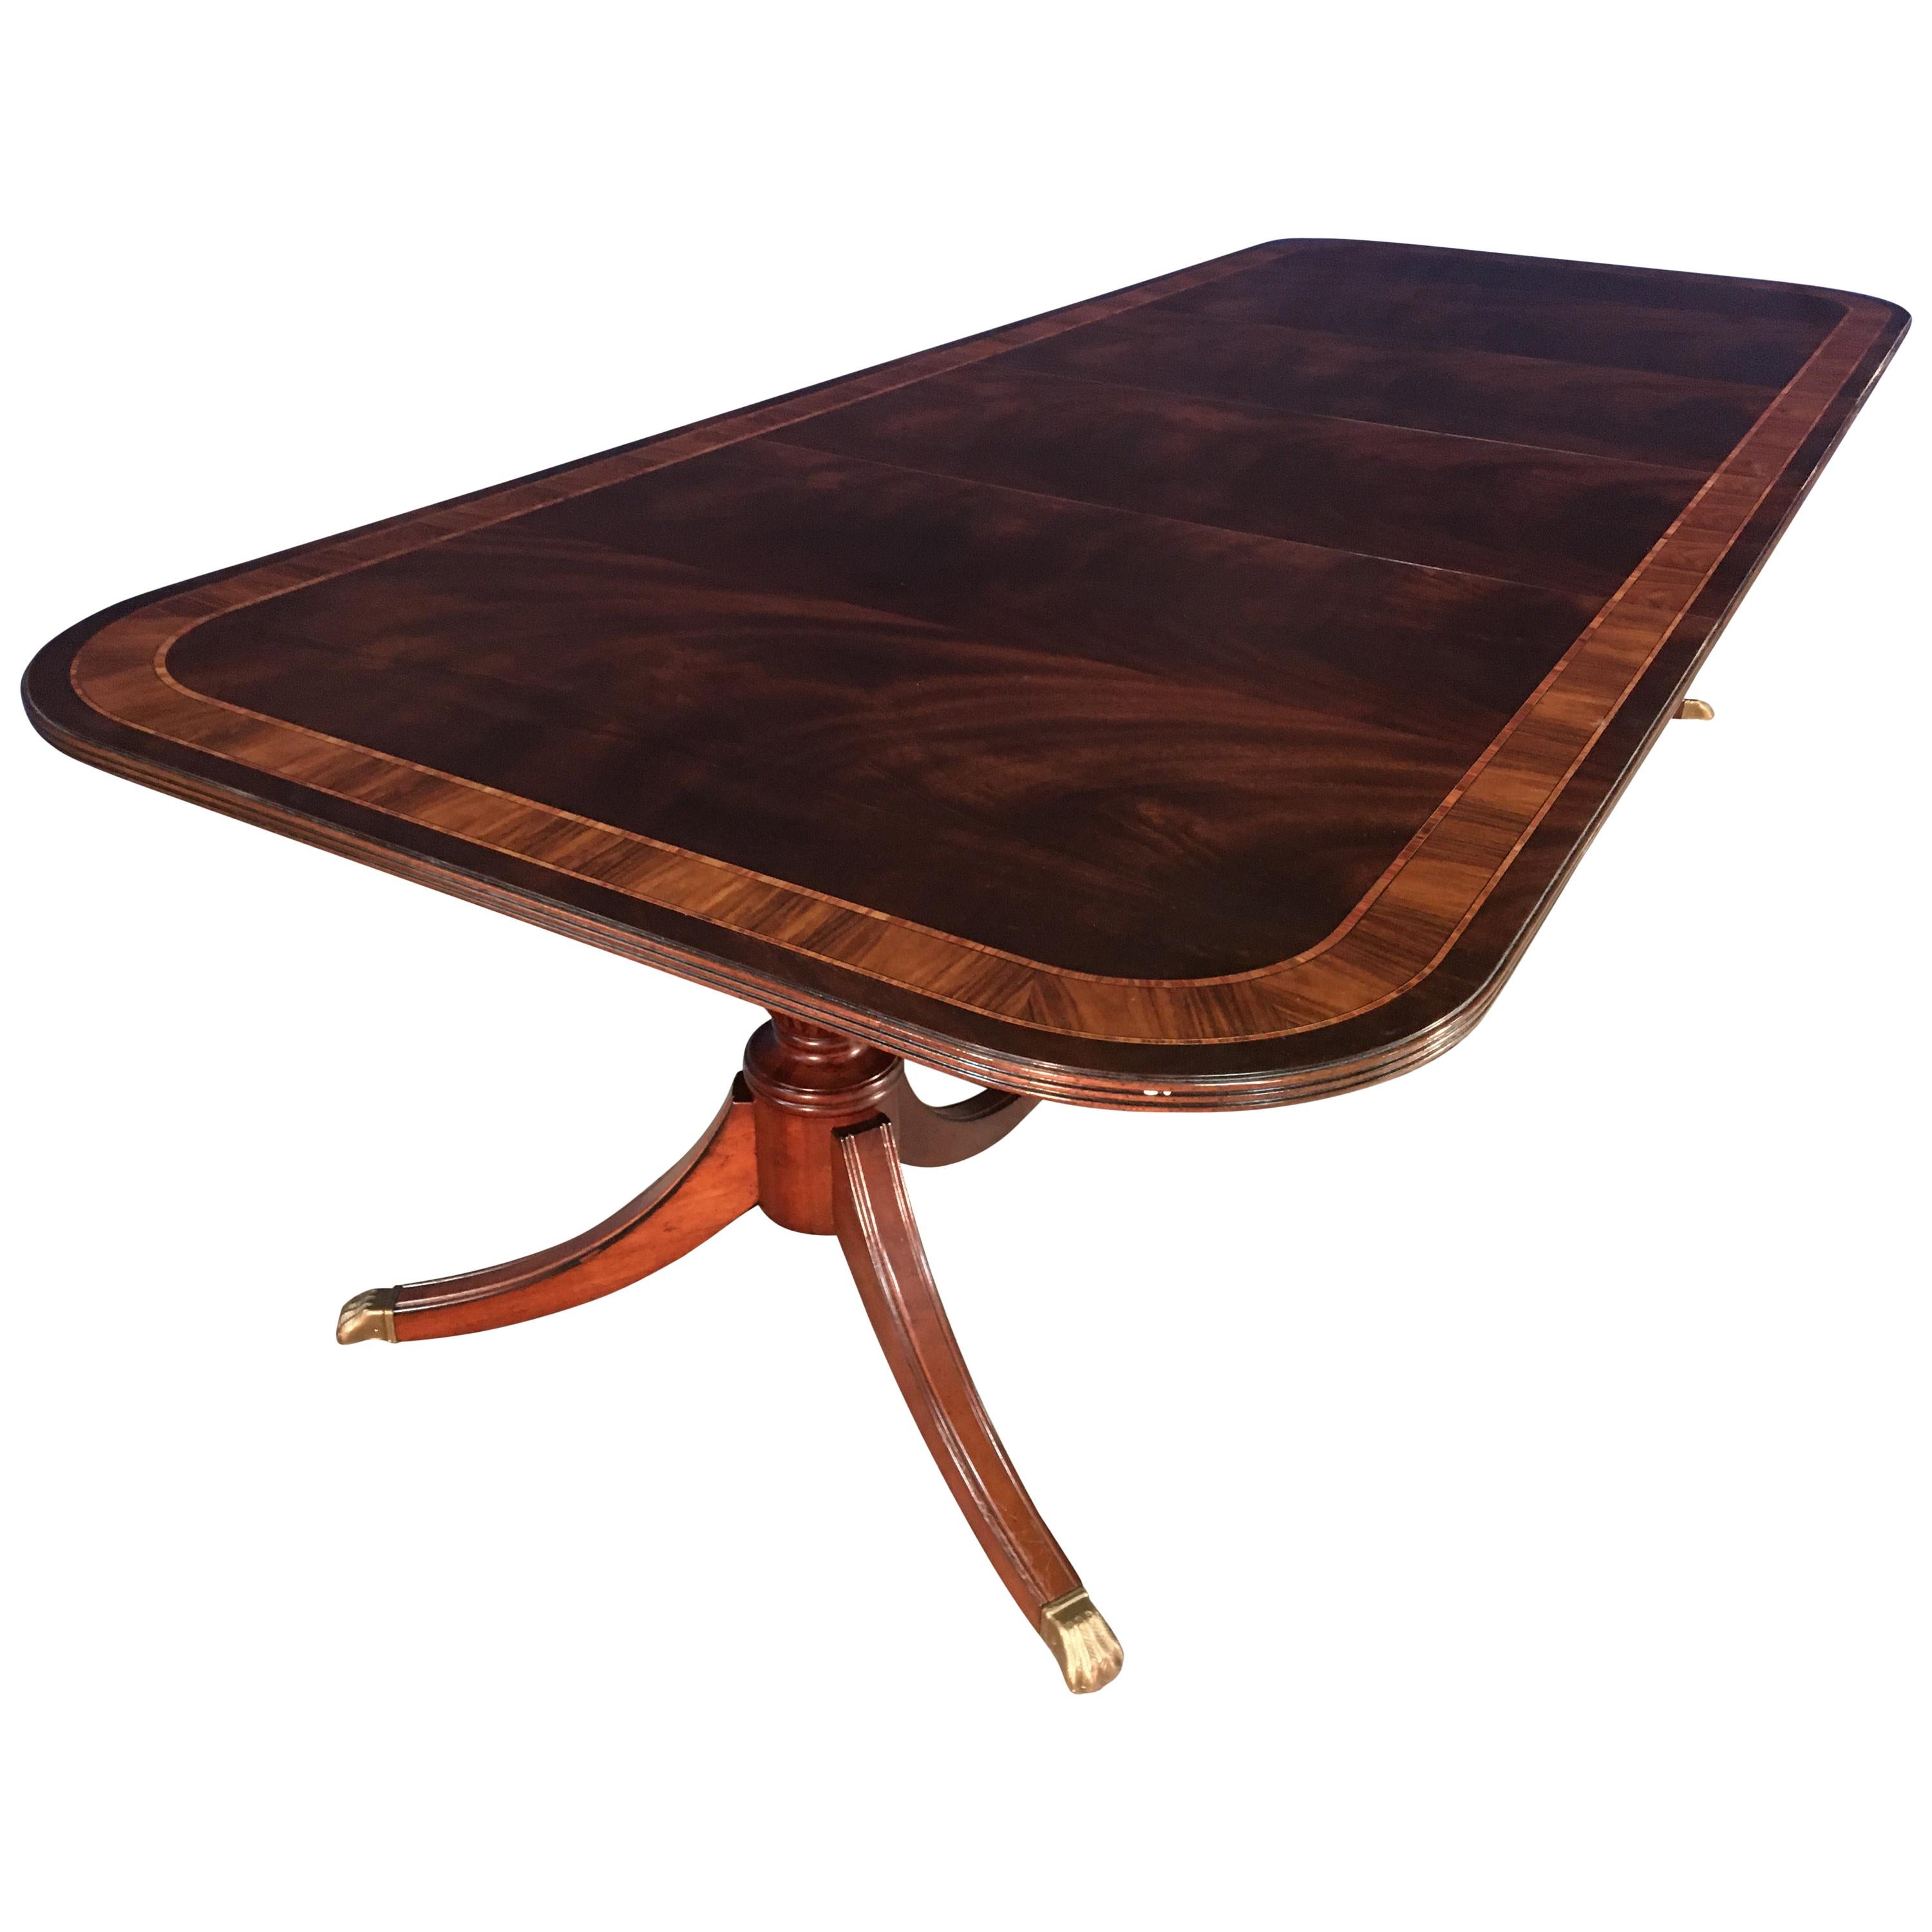 Multi-Banded Mahogany Georgian Style Dining Table by Leighton Hall For Sale